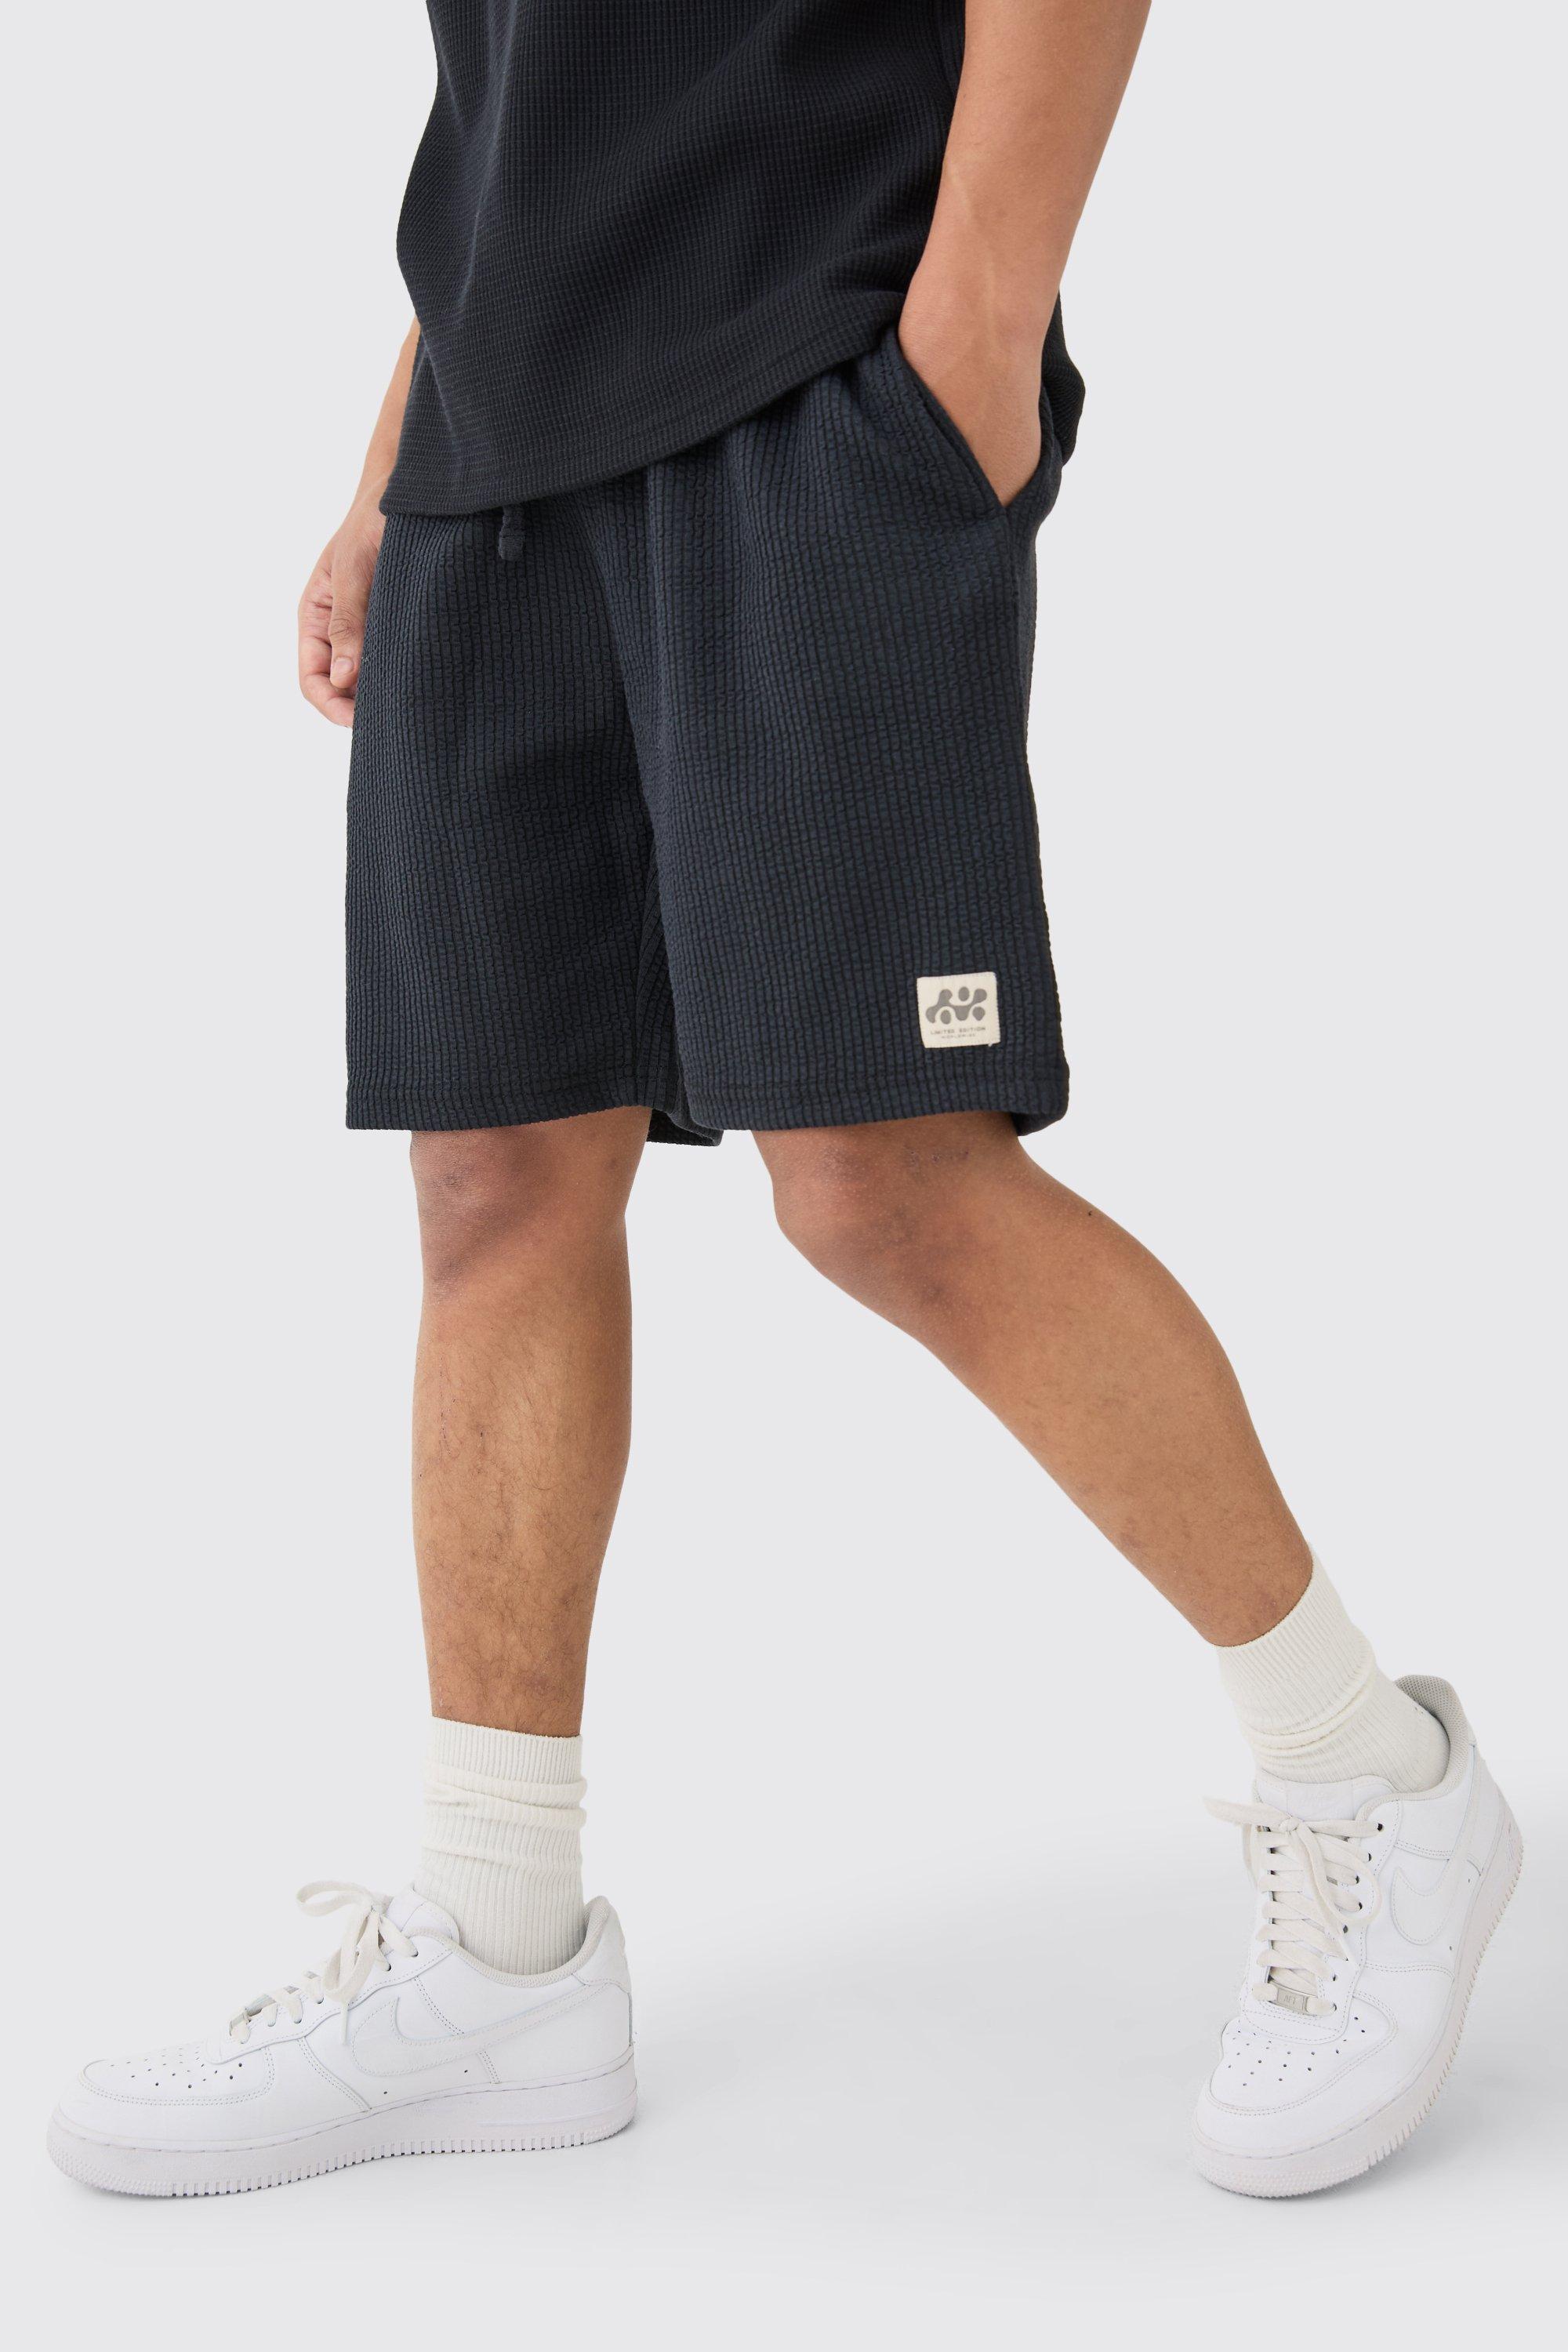 Image of Relaxed Mid Length Textured Short With Woven Tab, Nero